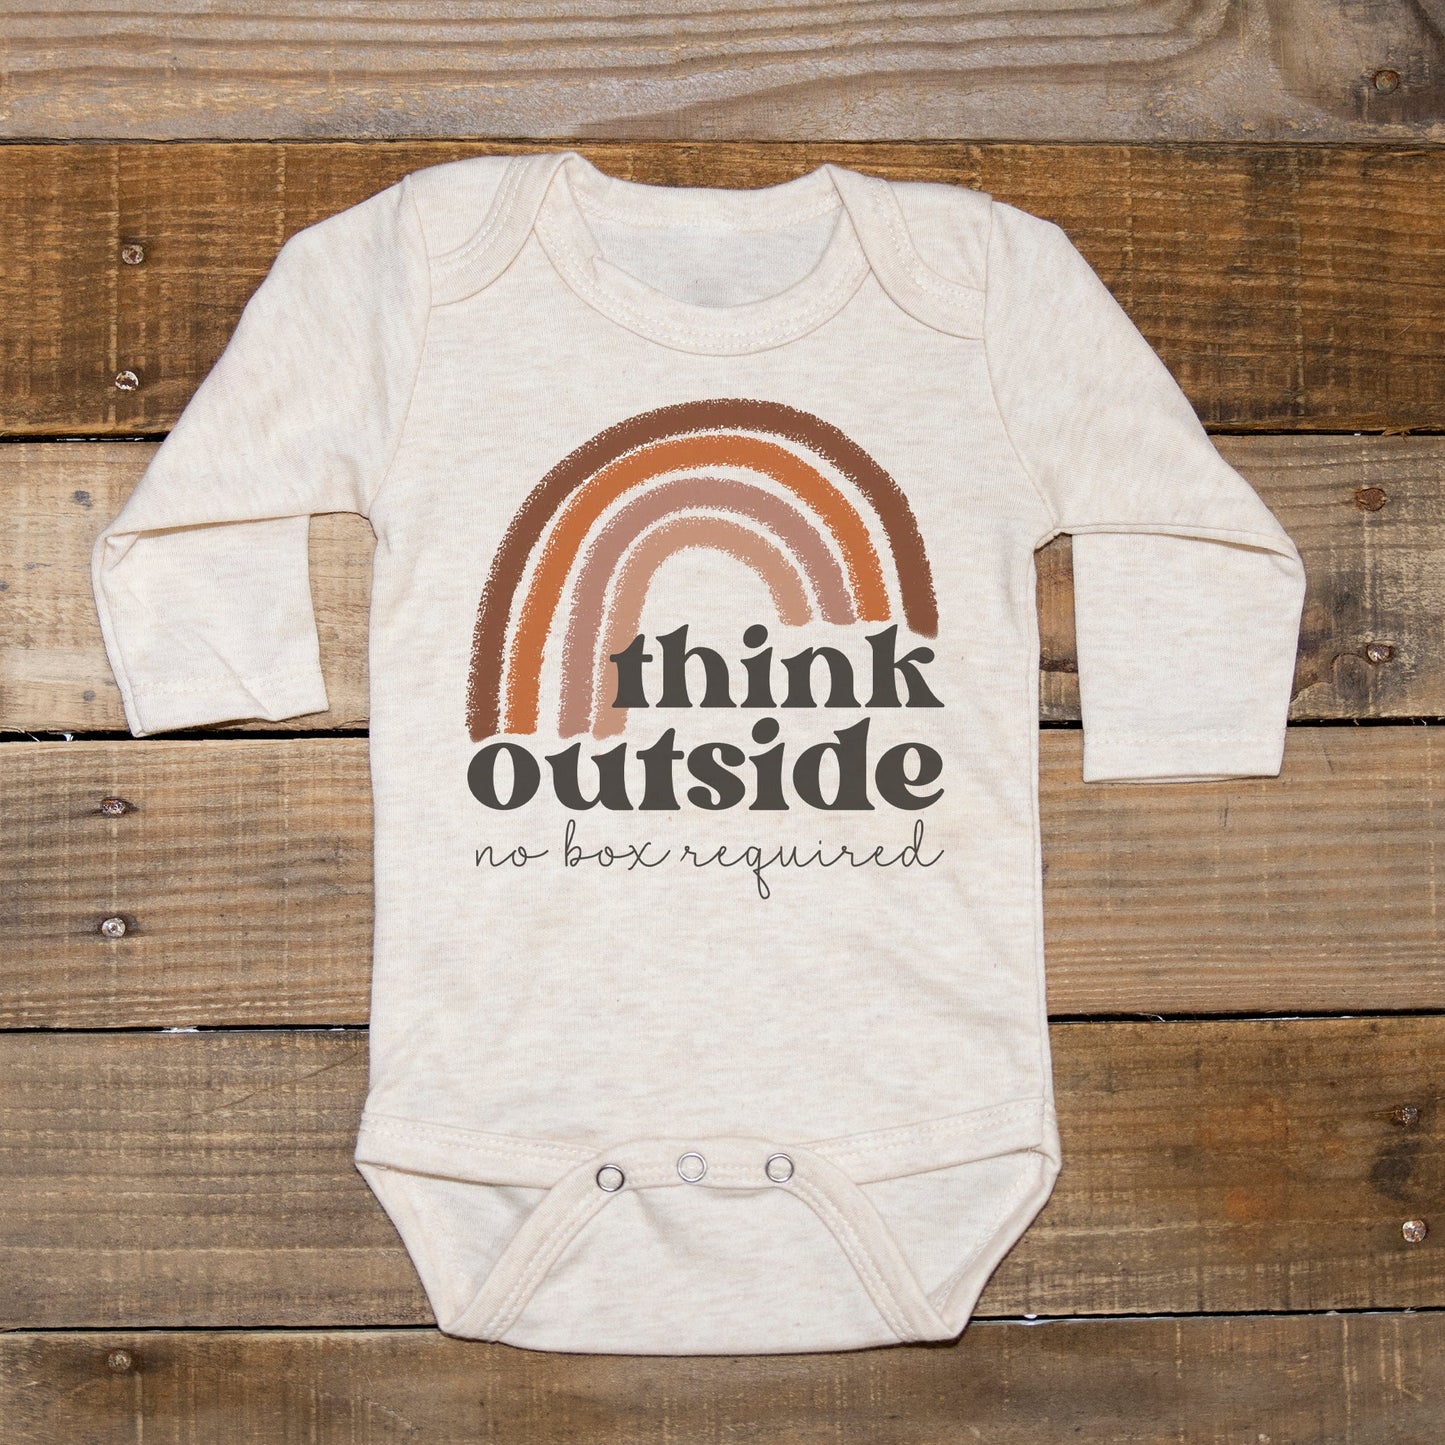 "Think outside no box required" Neutral Rainbow body suit